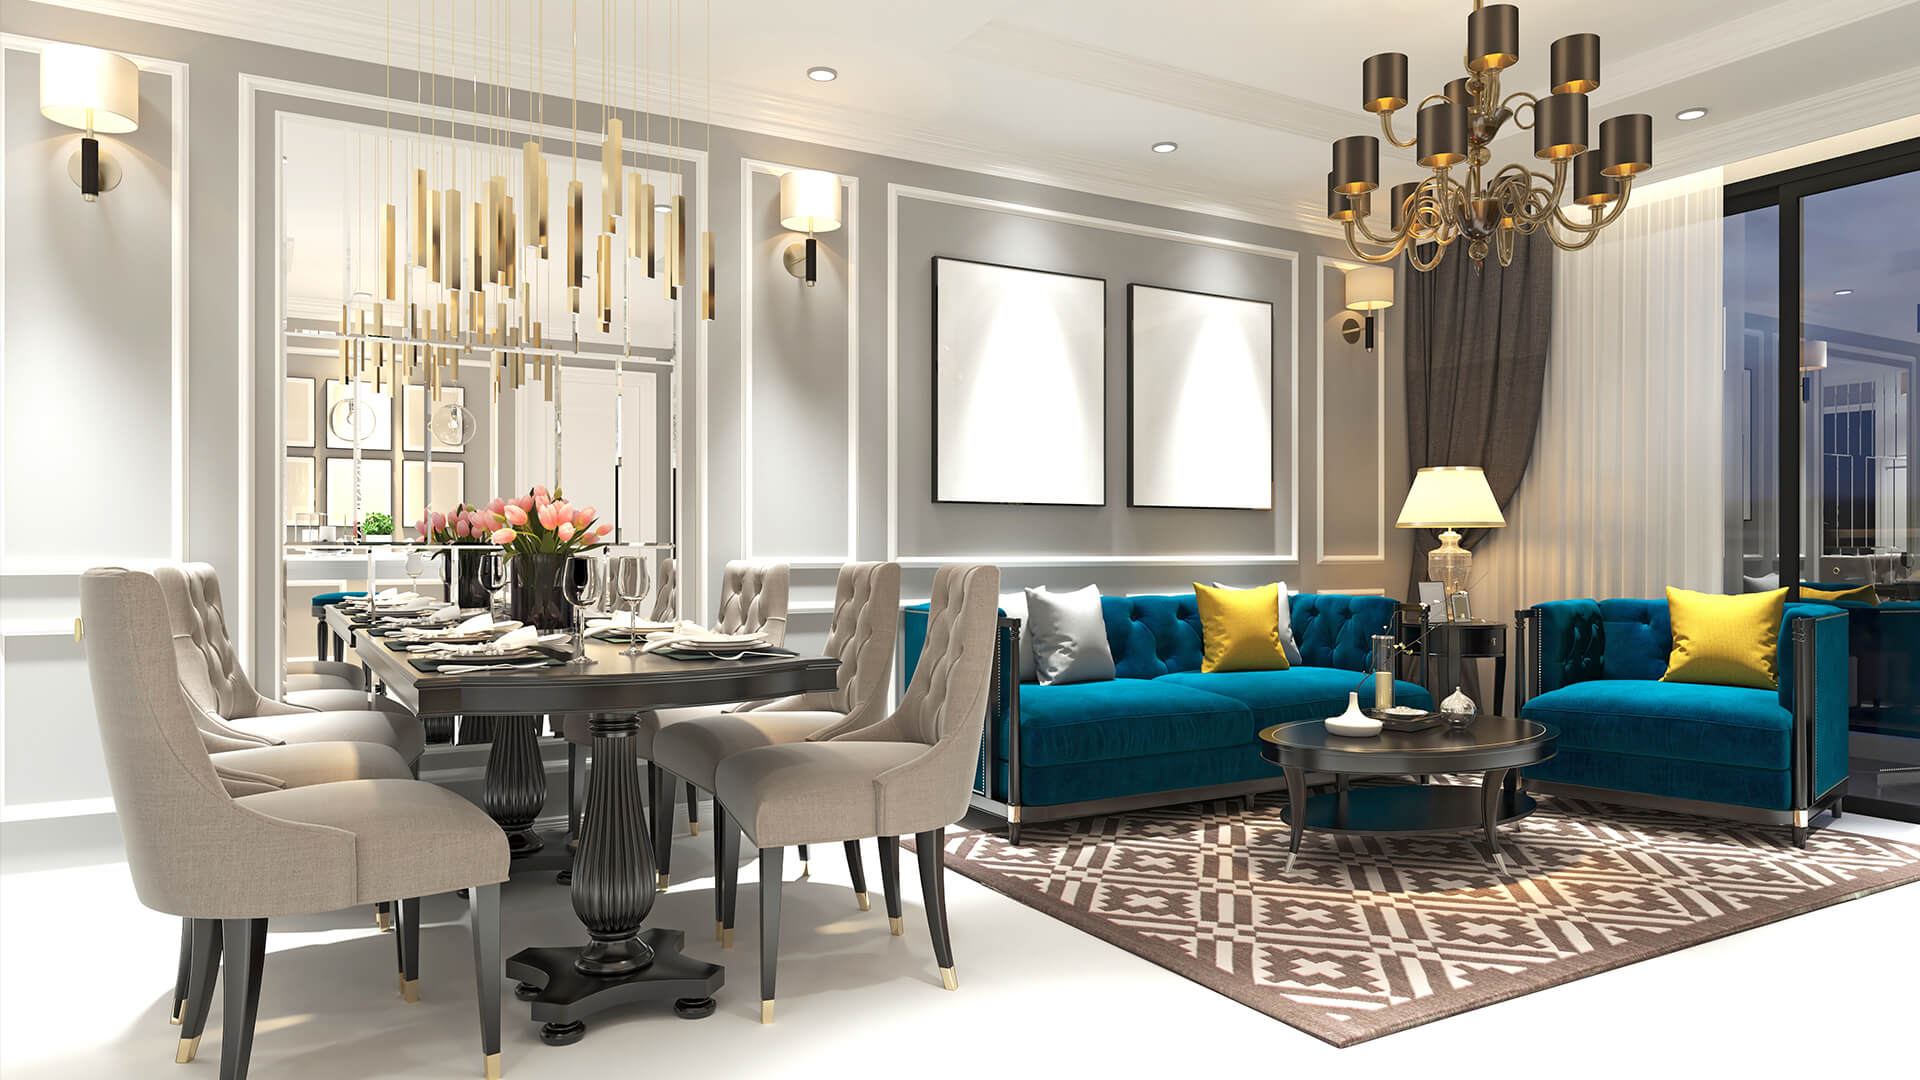 Ways to Make Your Home Look More Elegant and Luxurious - Lux Magazine